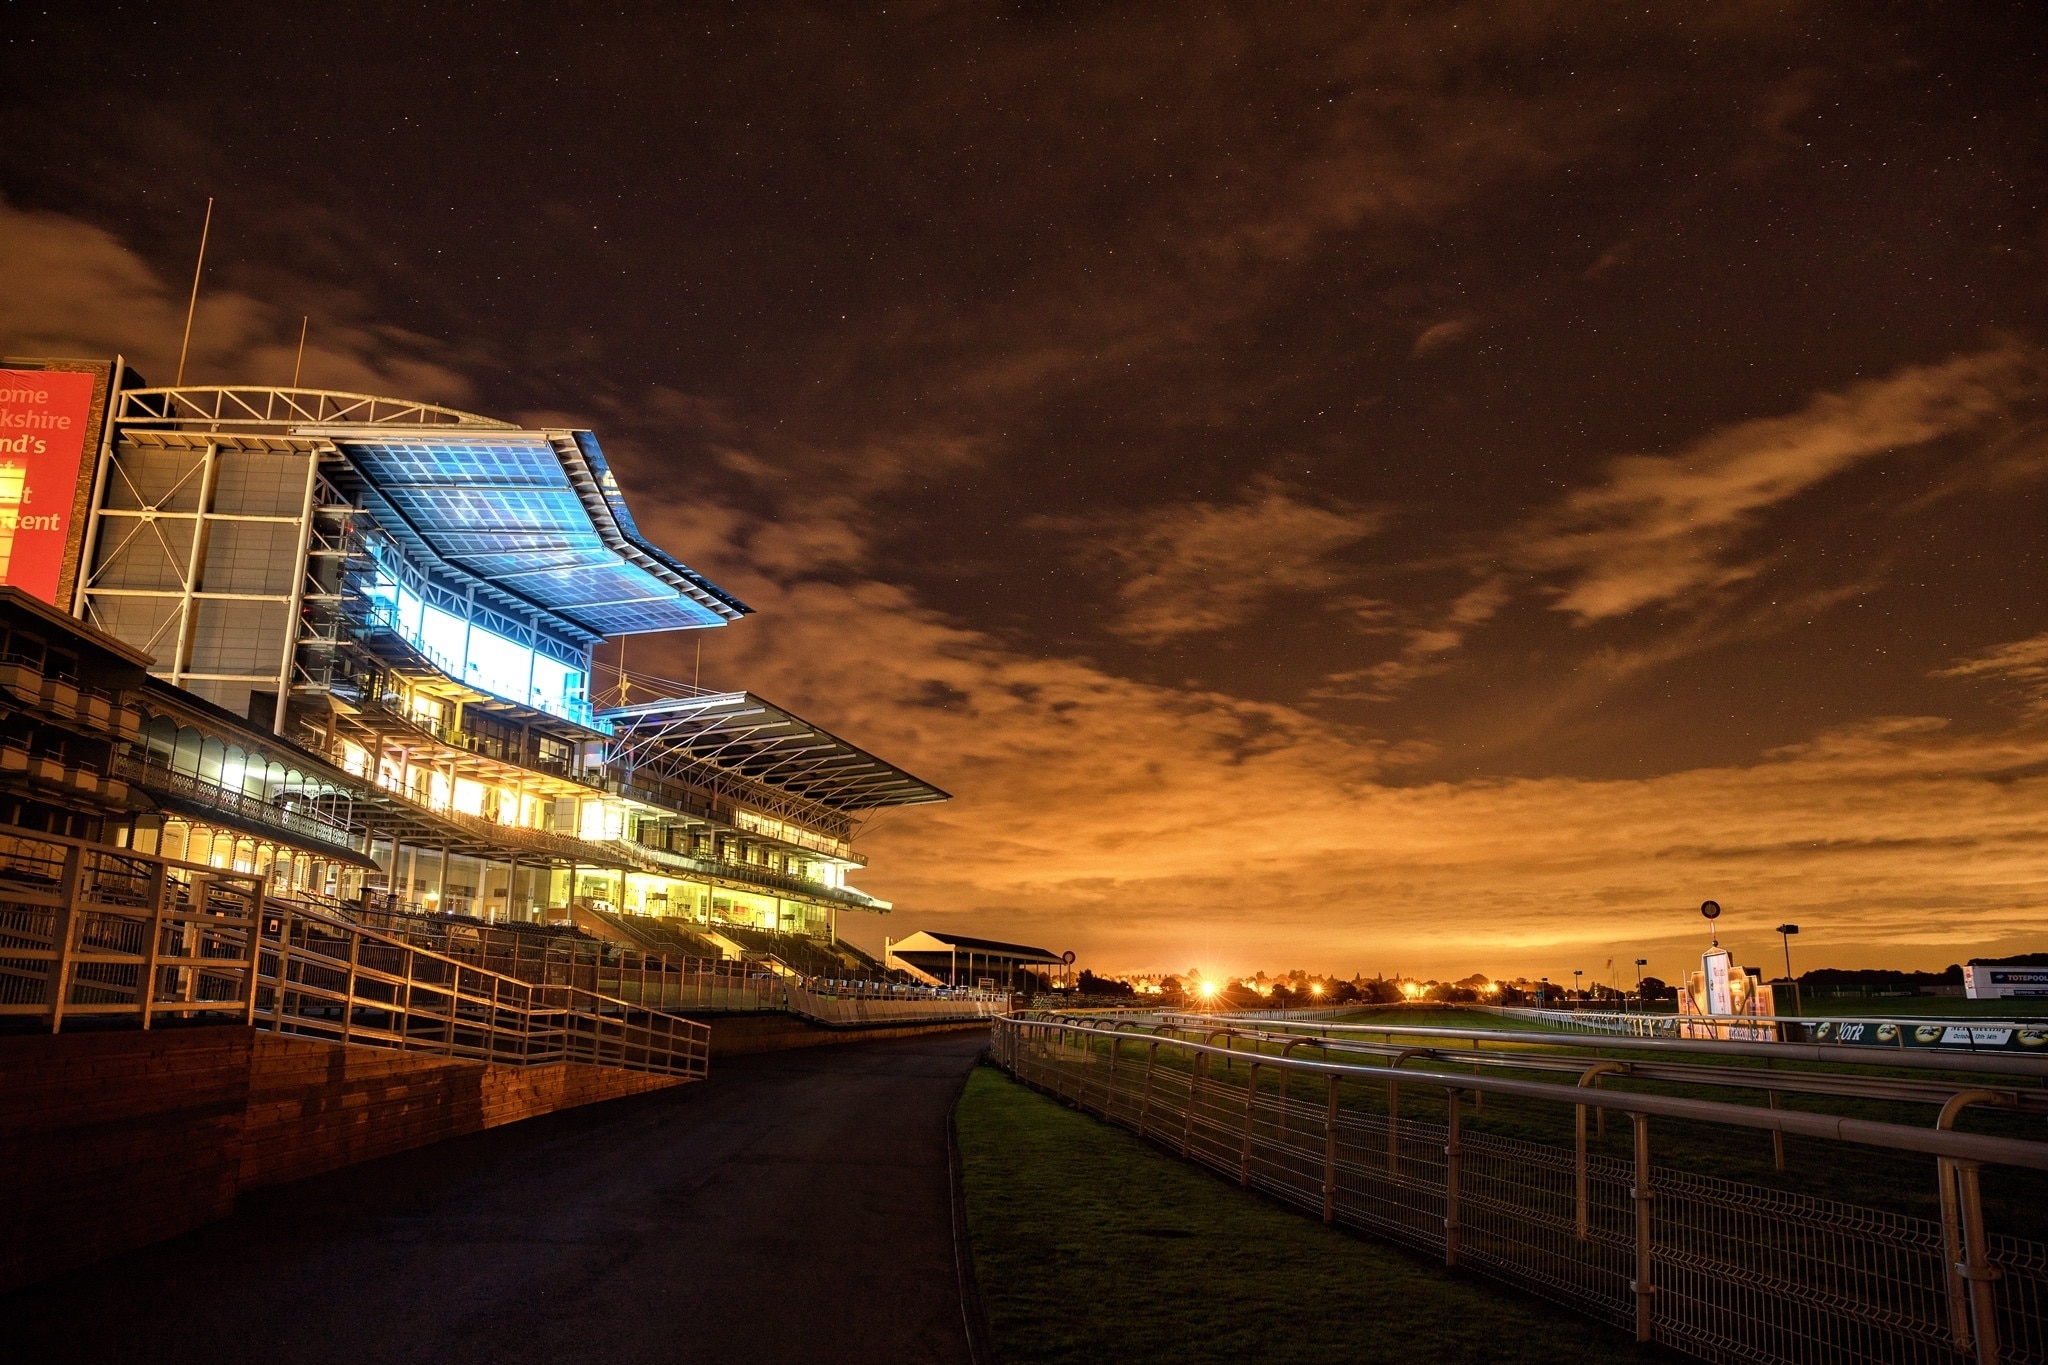 a little night time photo shot at York Racecourse